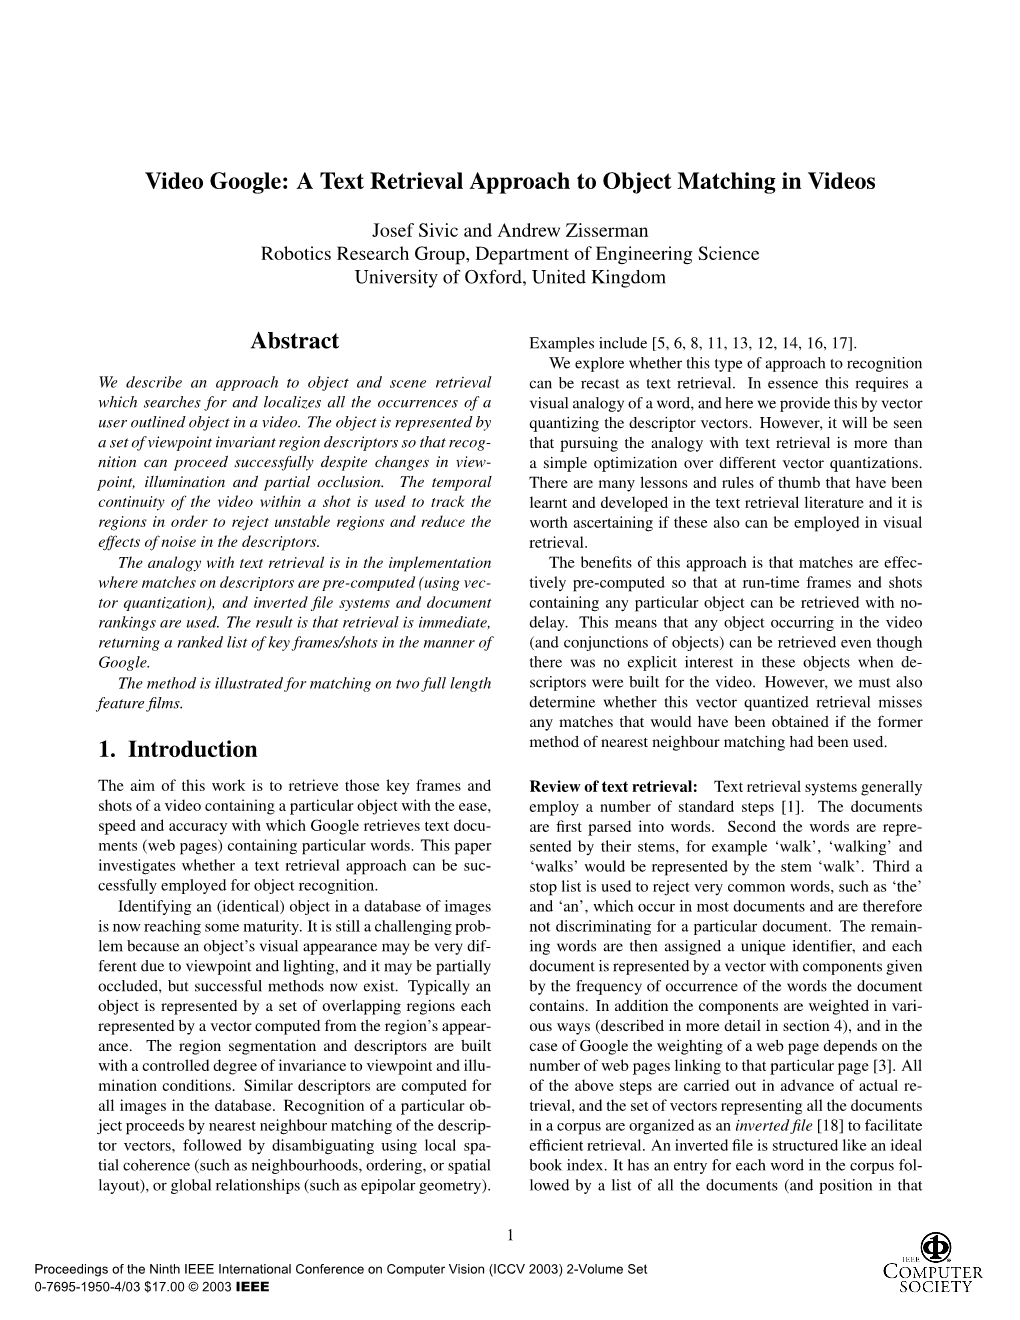 Video Google: a Text Retrieval Approach to Object Matching in Videos Abstract 1. Introduction